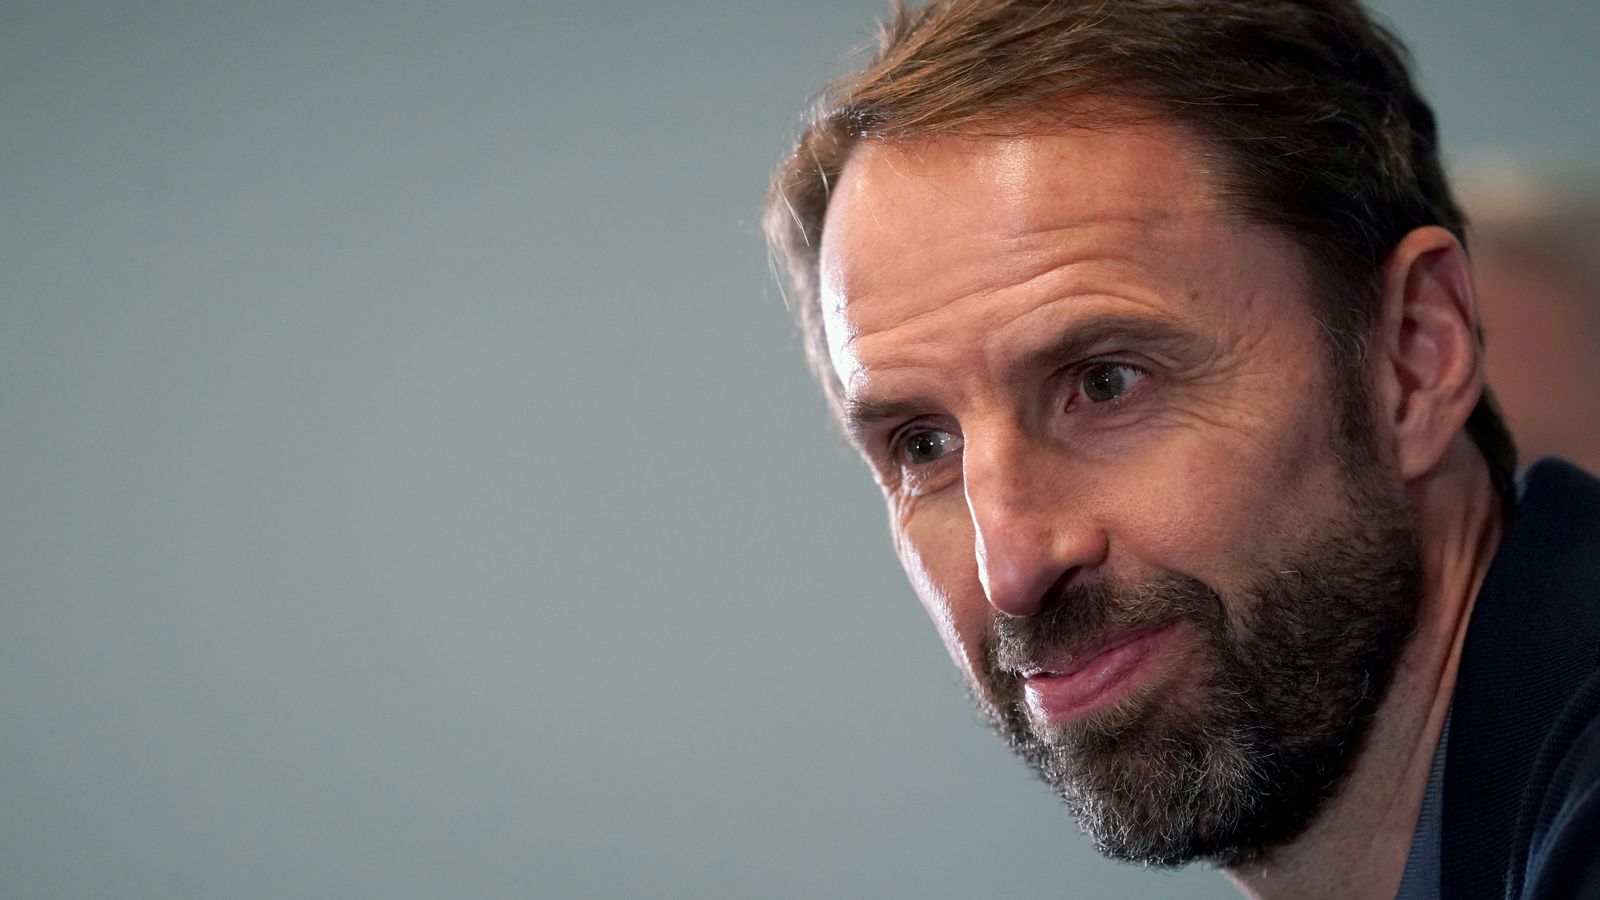 Southgate encourages England players to reassess social media use ahead of World Cup